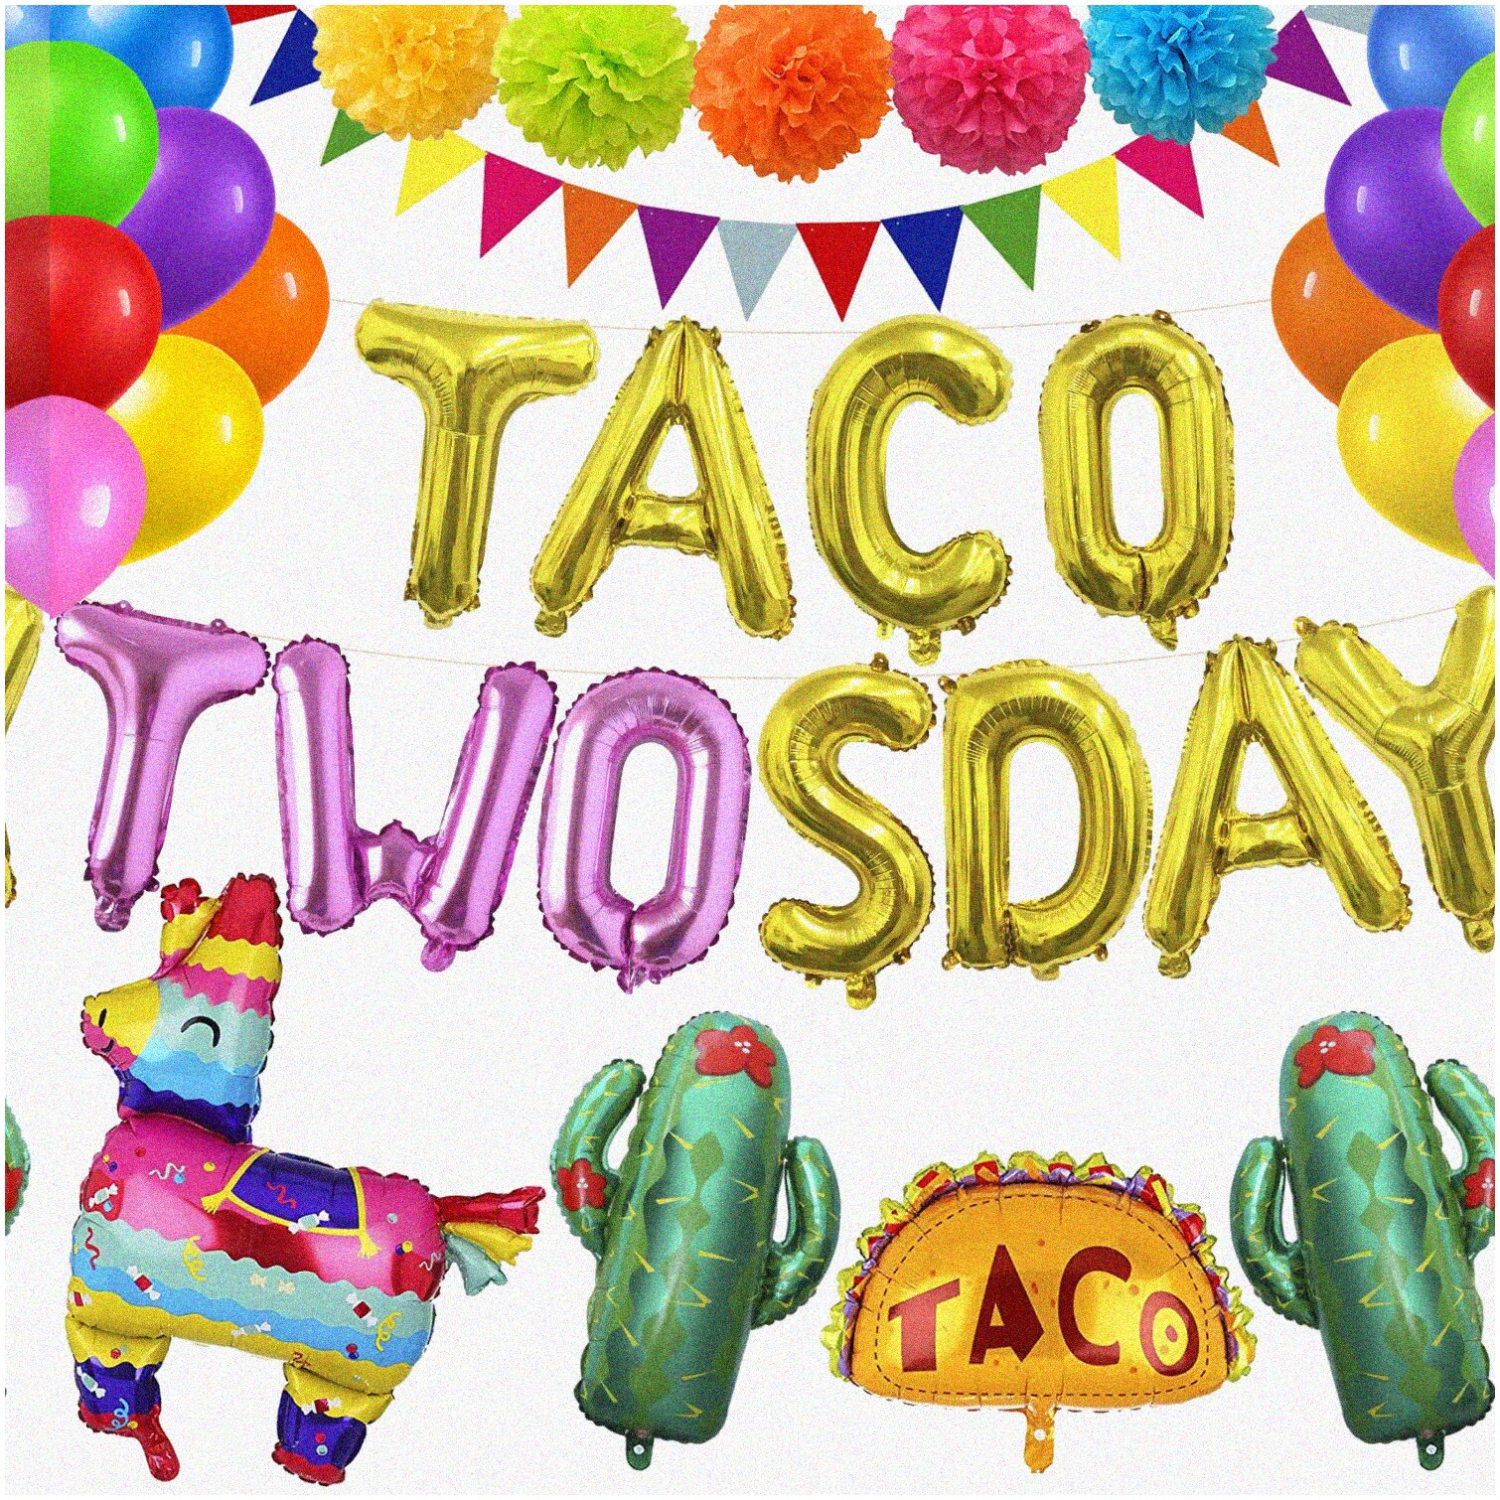 Fiesta Fun 2nd Birthday Party Pack - Taco Twosday Decorations, Banner, Balloons, Mexican Fiesta Theme - Cinco De Mayo Celebration Essentials